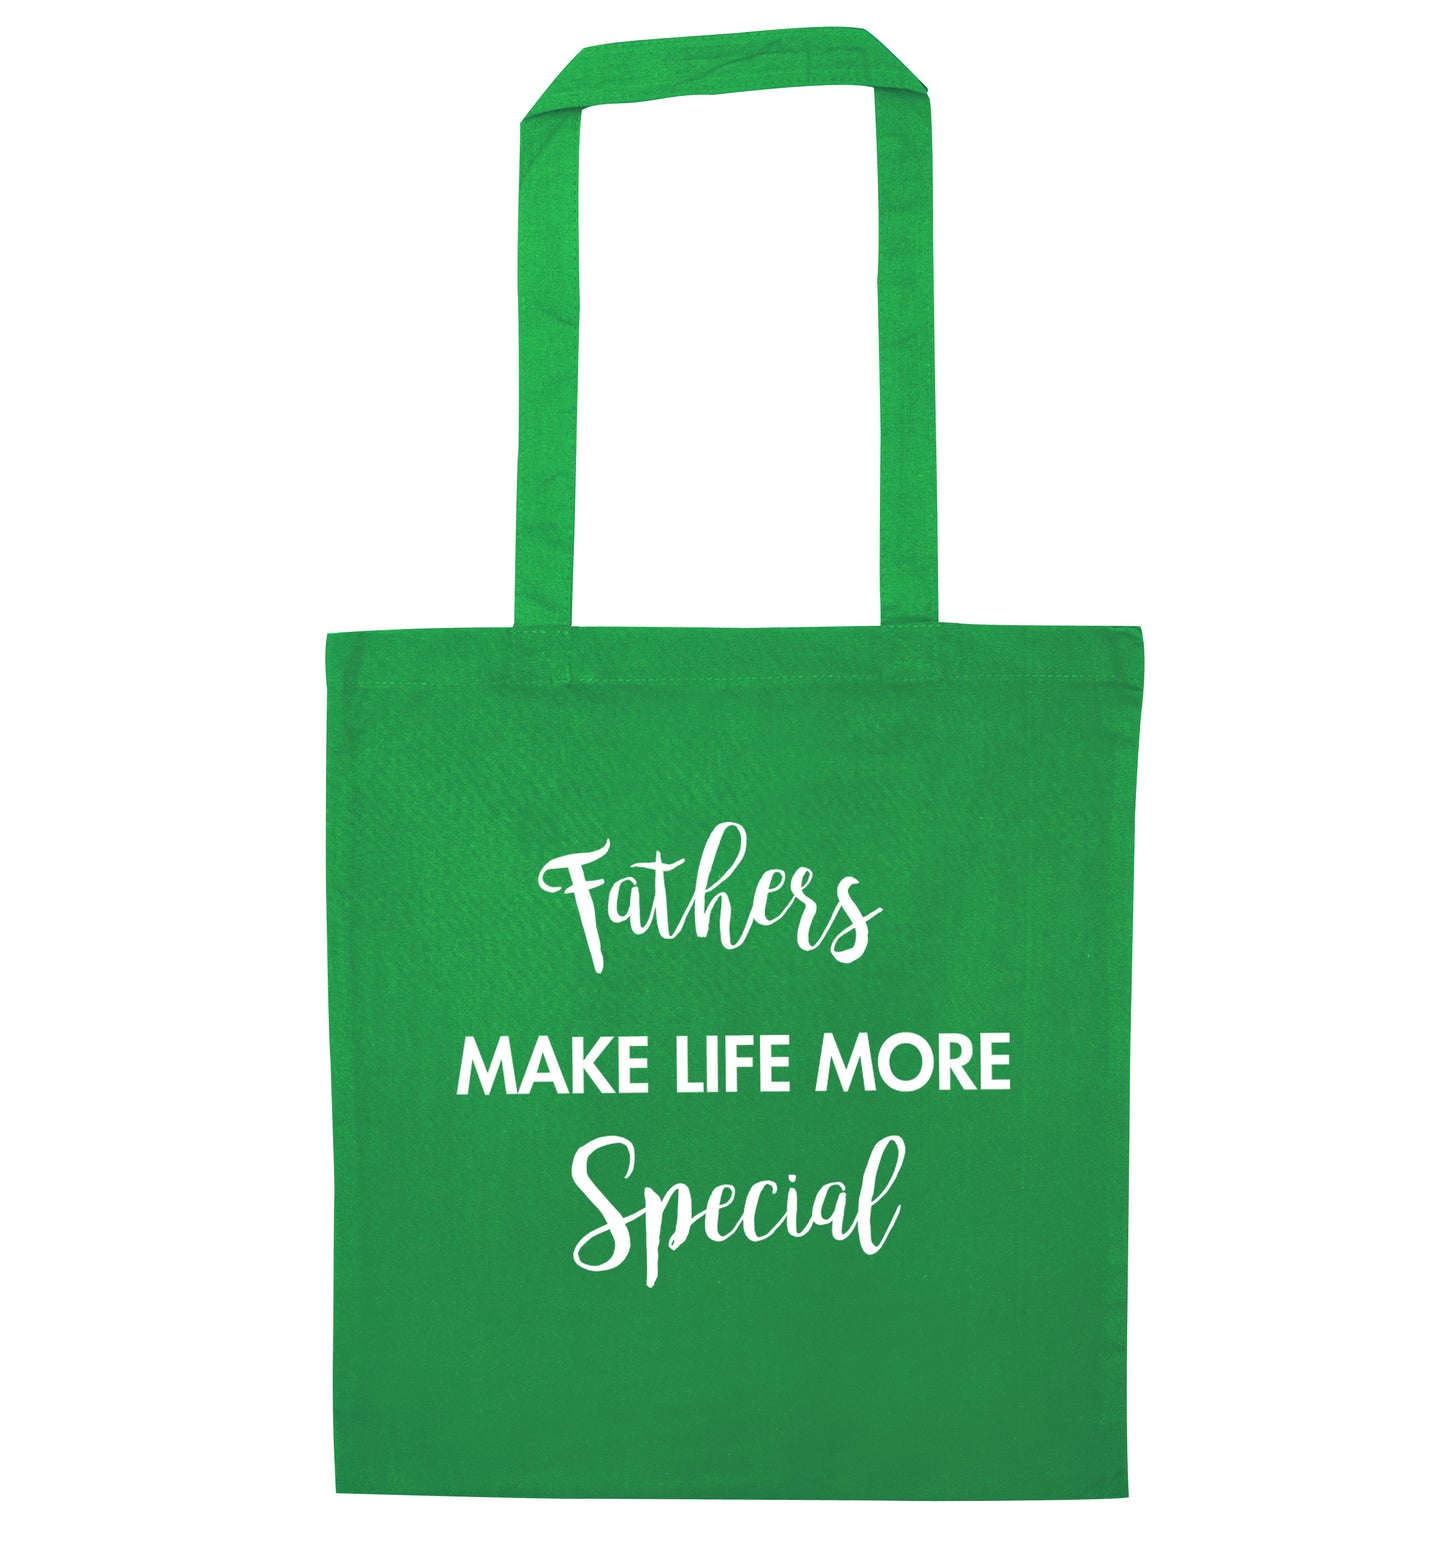 Fathers make life more special green tote bag